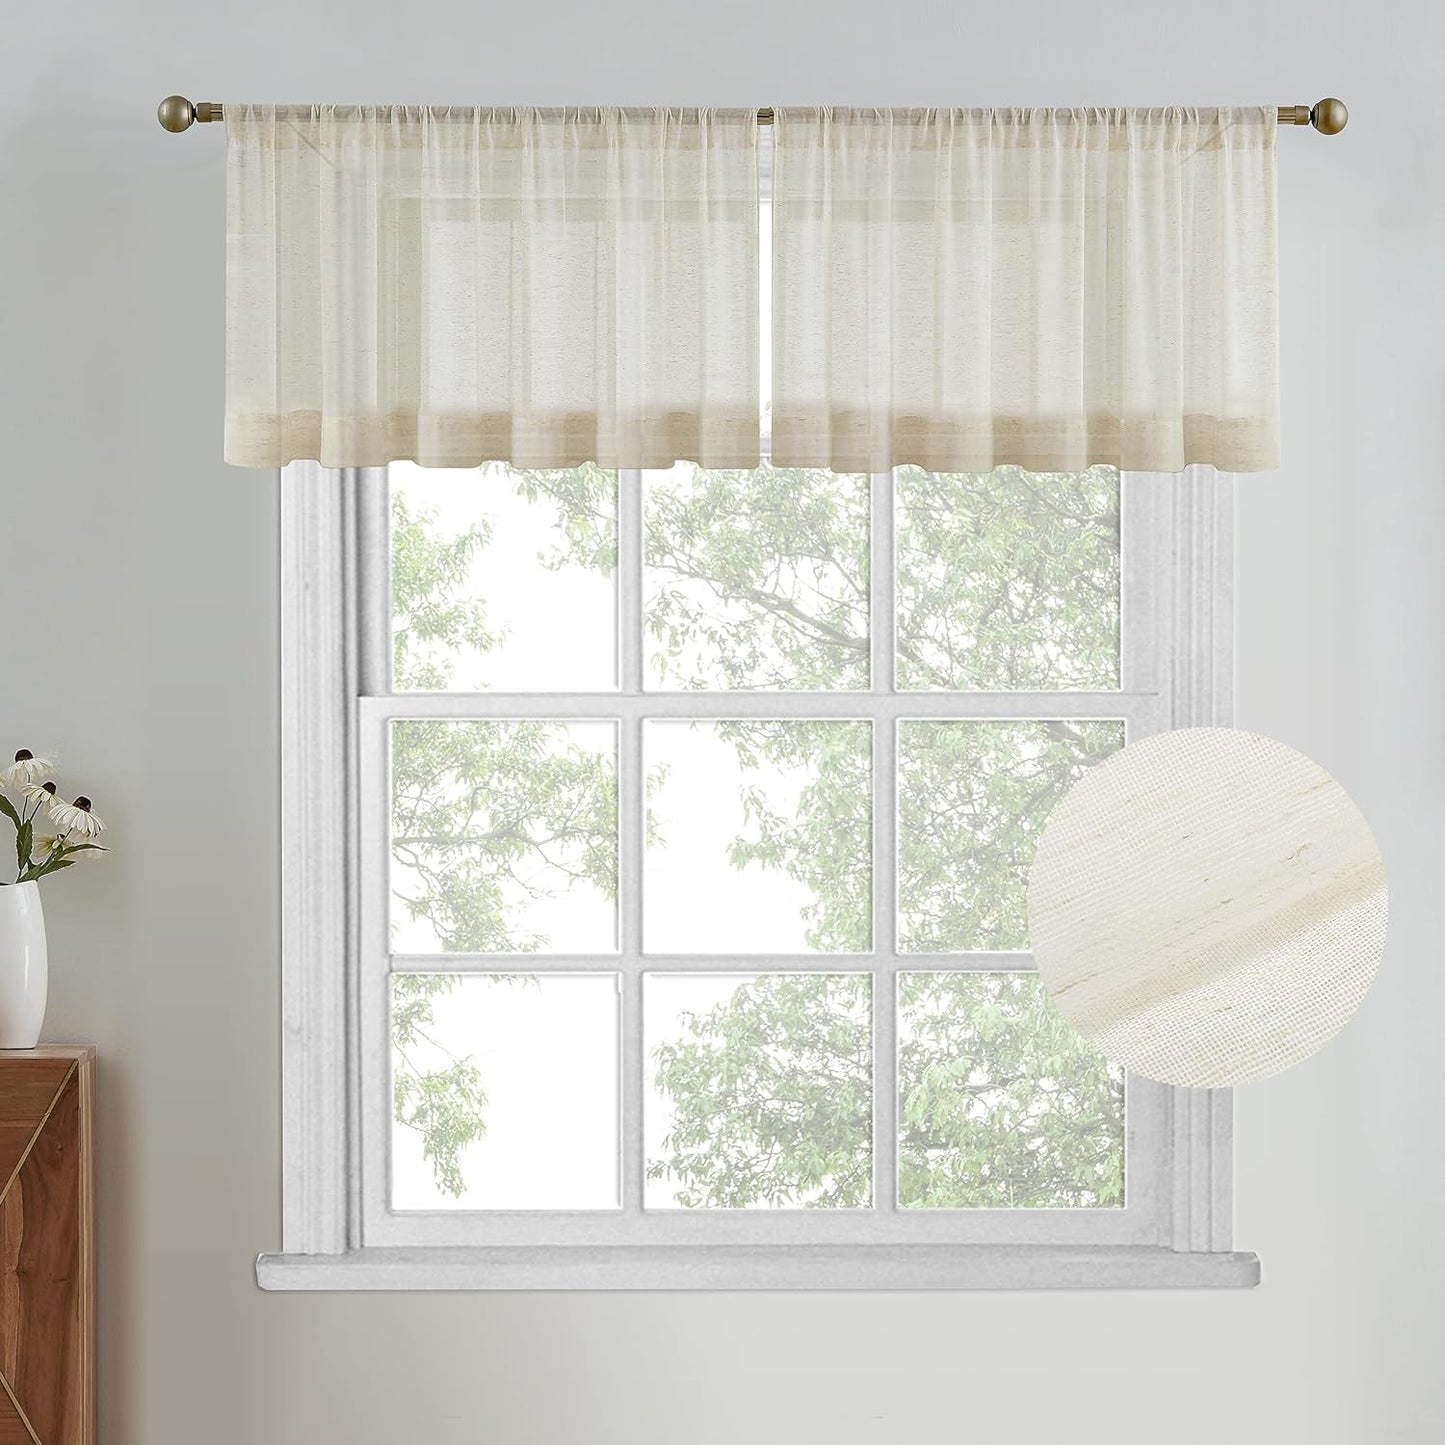 July Joy White Sheer Valance Curtains for Kitchen, 18 Inch Length Rod Pocket Window Drapes Faux Linen Semi Sheer Small Curtains for Bathroom Basement W 52 X L 18 Inch, 2 Panels